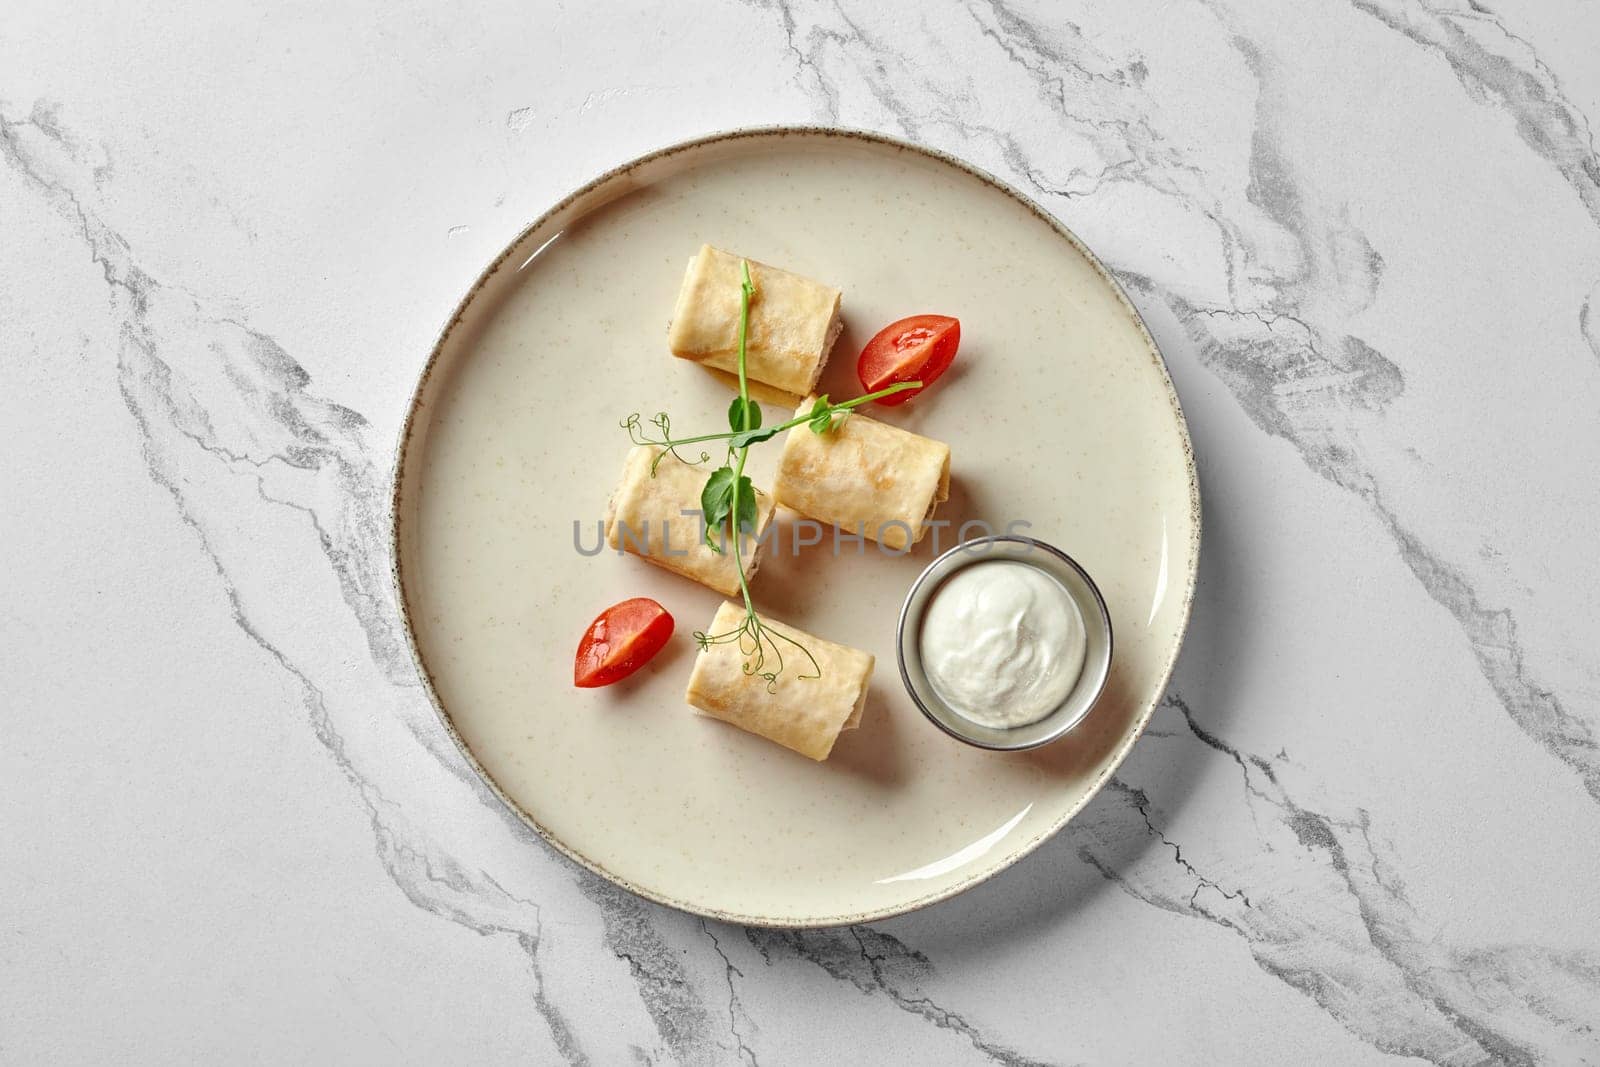 Savory chicken crepe rolls with creamy dipping sauce by nazarovsergey